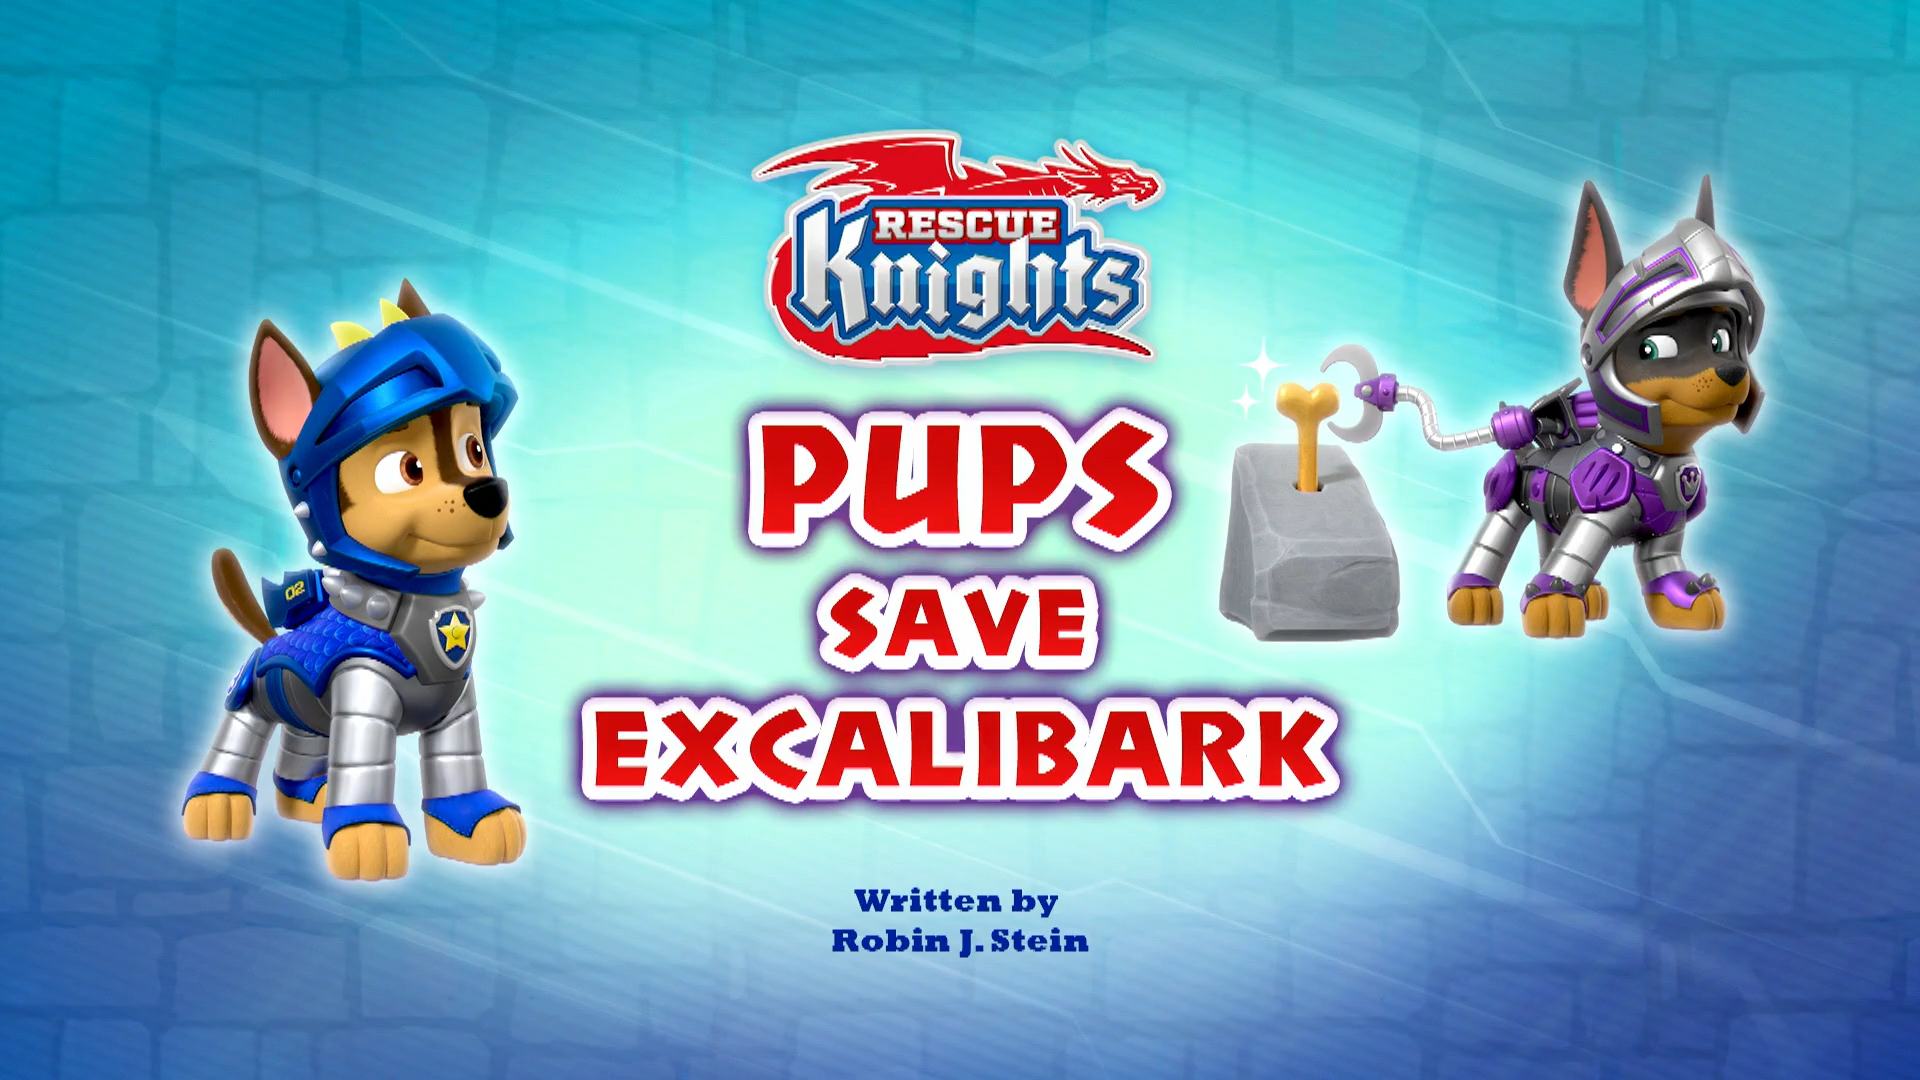  Paw Patrol, Rescue Knights Ryder and Pups, paquete de